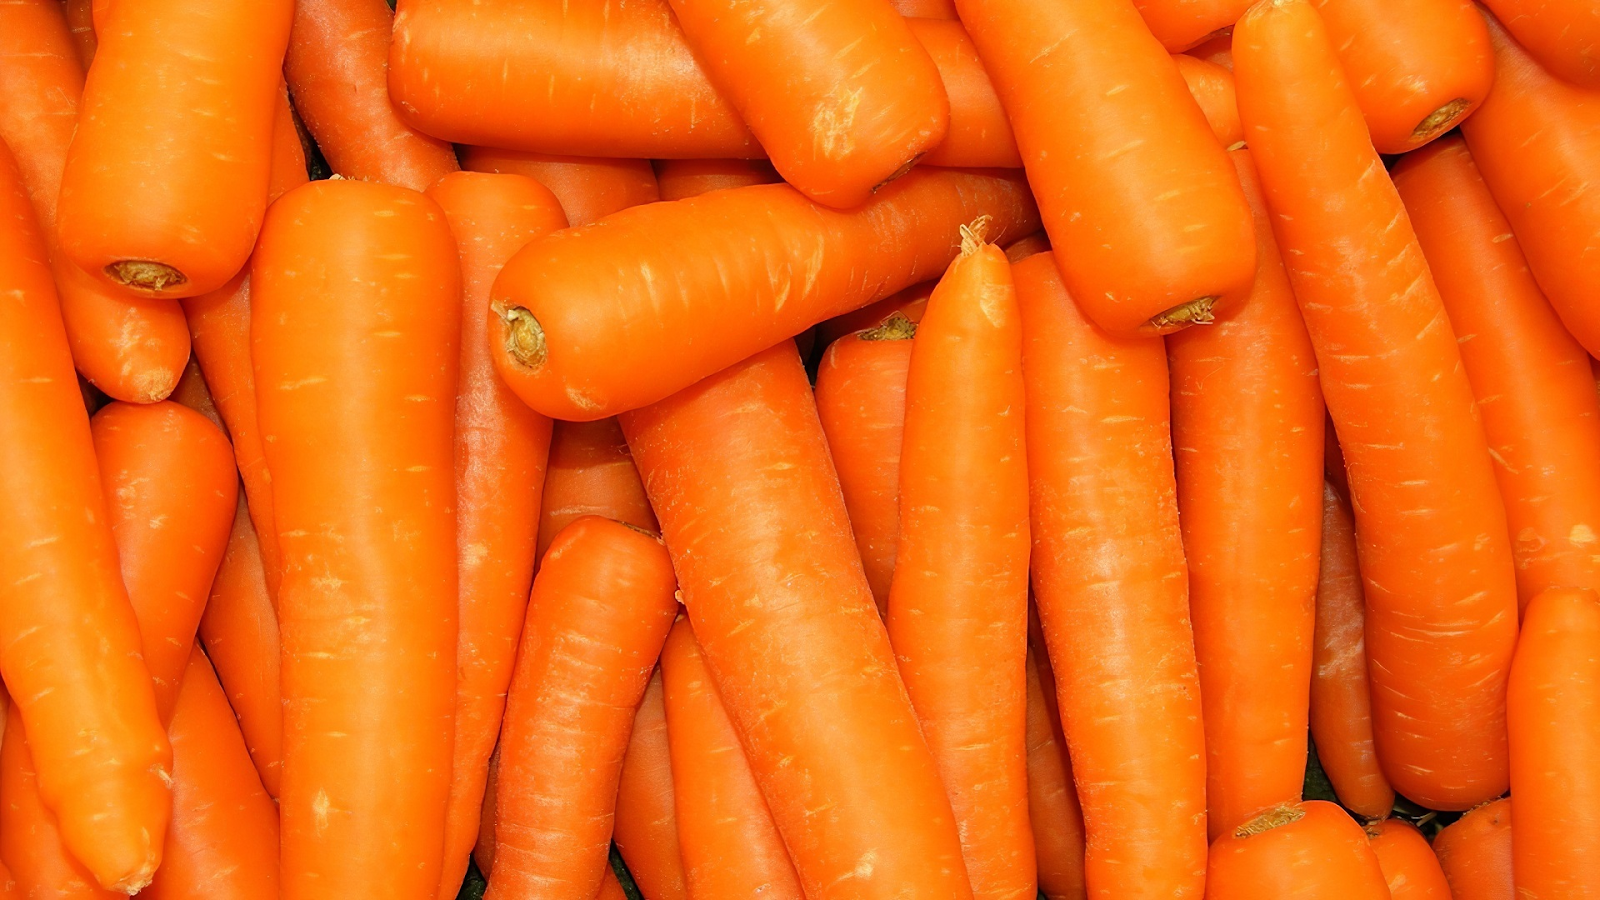 Carrot Intake to Lower Incidence of Urothelial Cancer